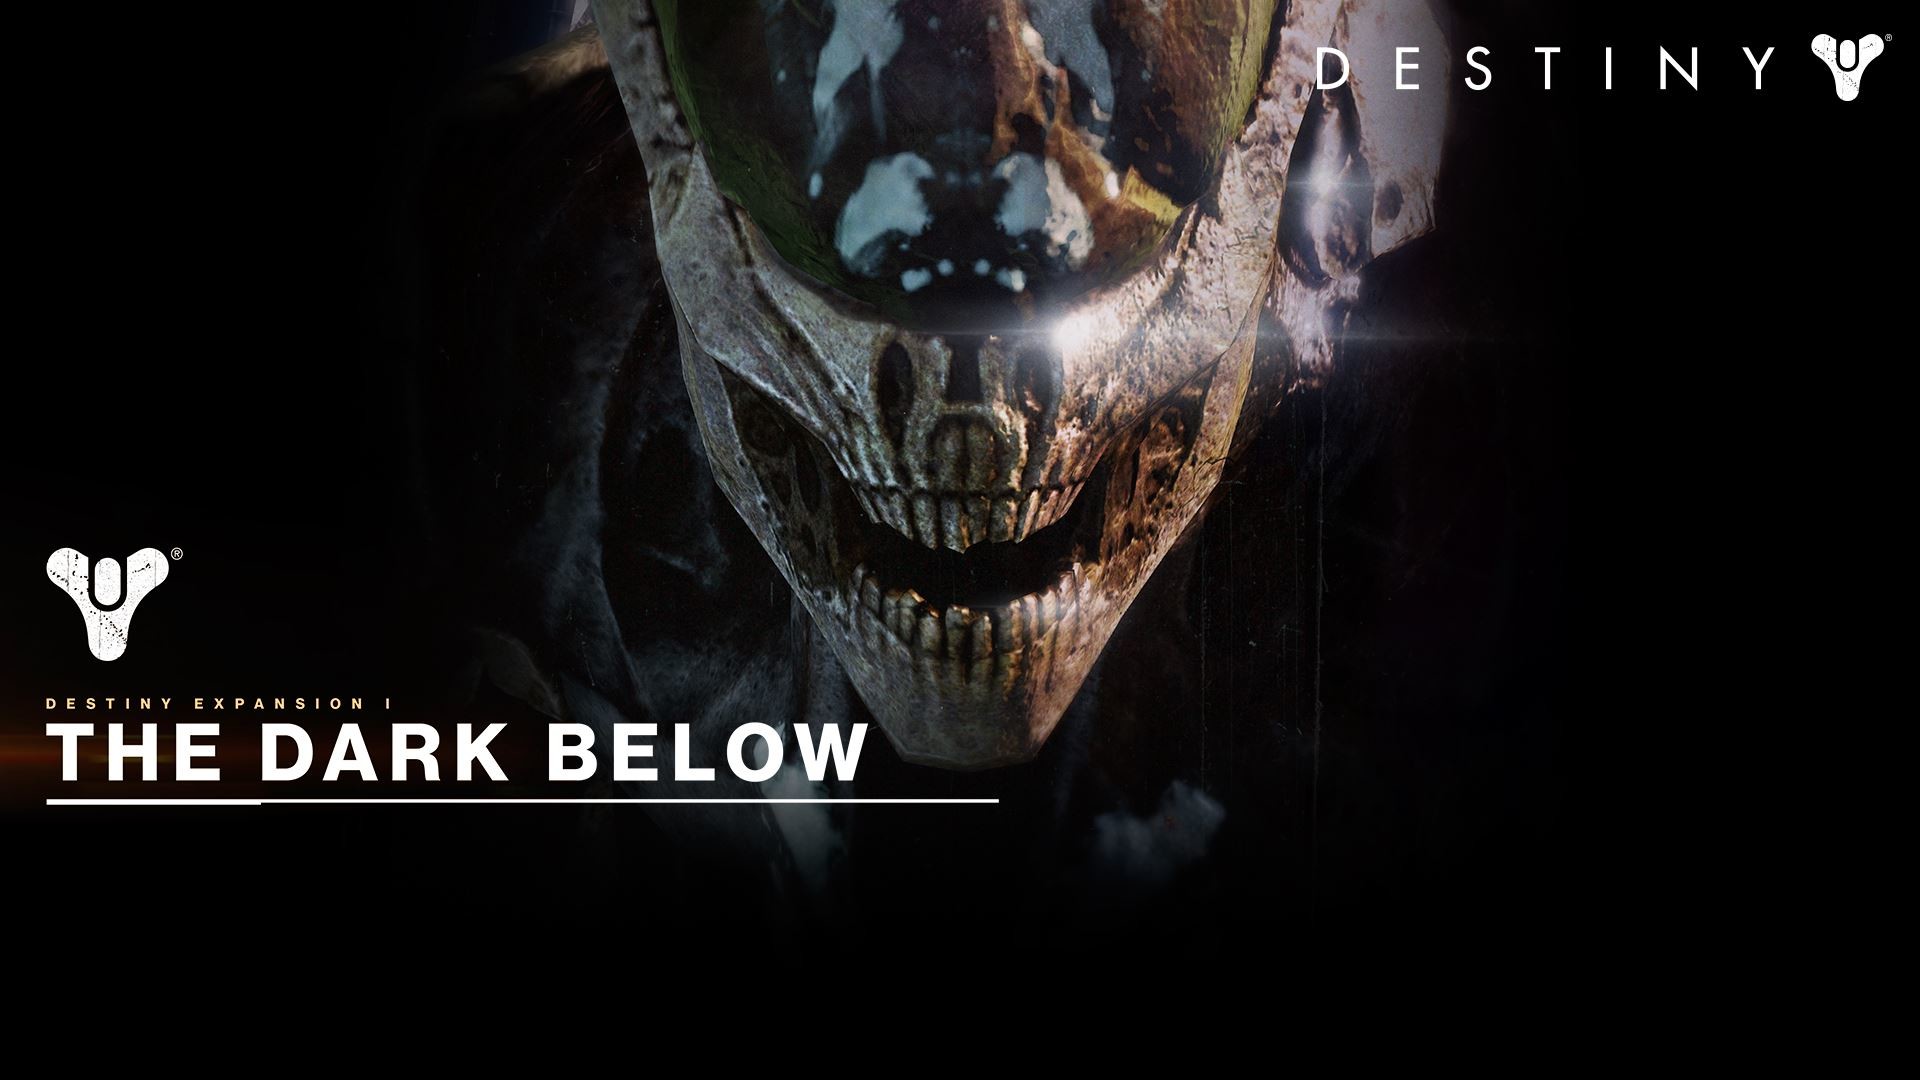 1920x1080 Destiny: The Dark Below & House of Wolves Expansions - The Ultimate Guide -  Xbox One, Xbox 360 News At XboxAchievements.com